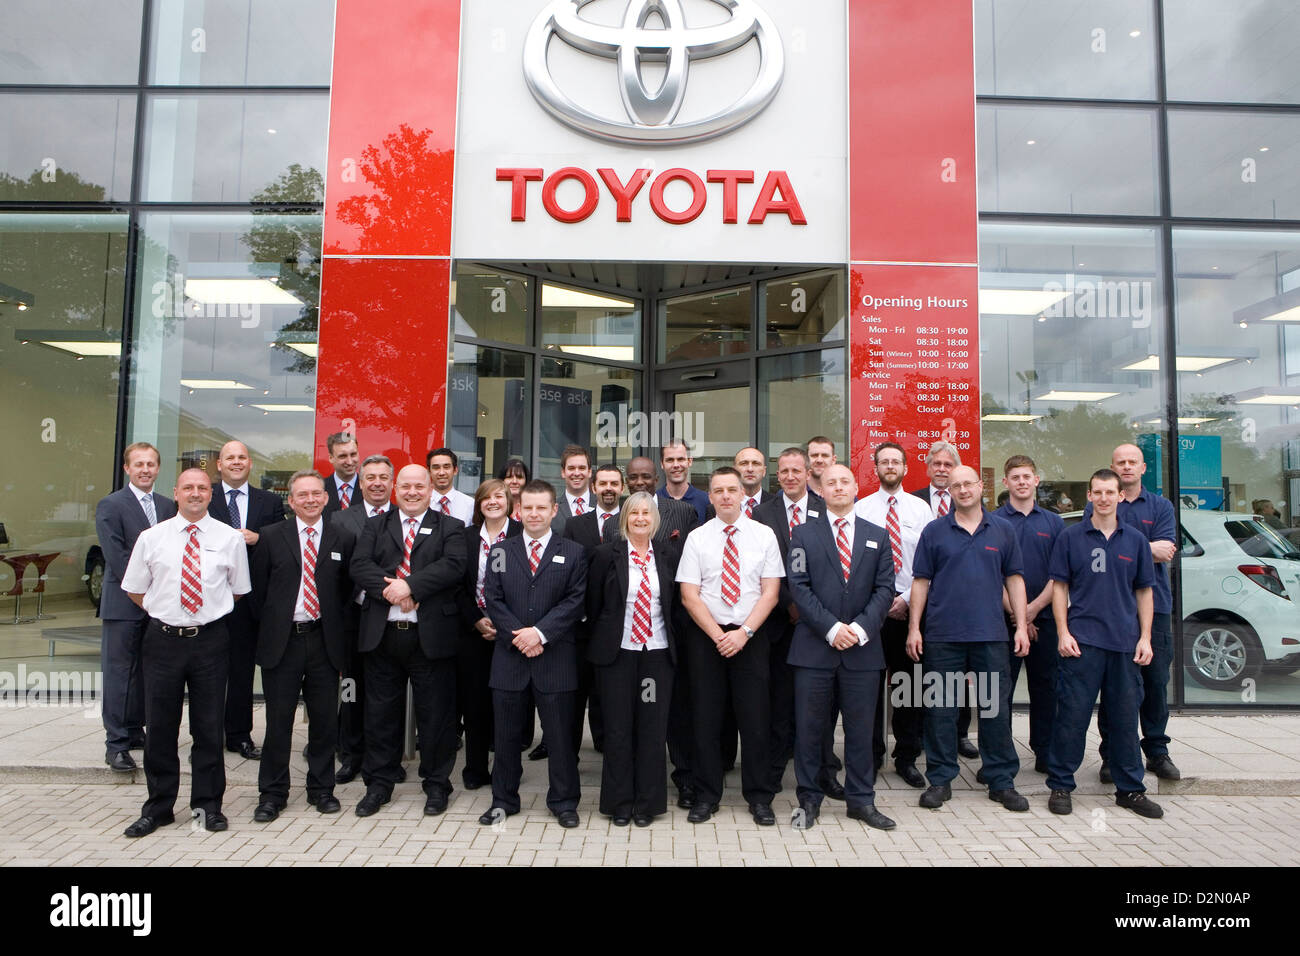 The staff of a Toyota car dealership pose for a group photo outside the entrance. Stock Photo